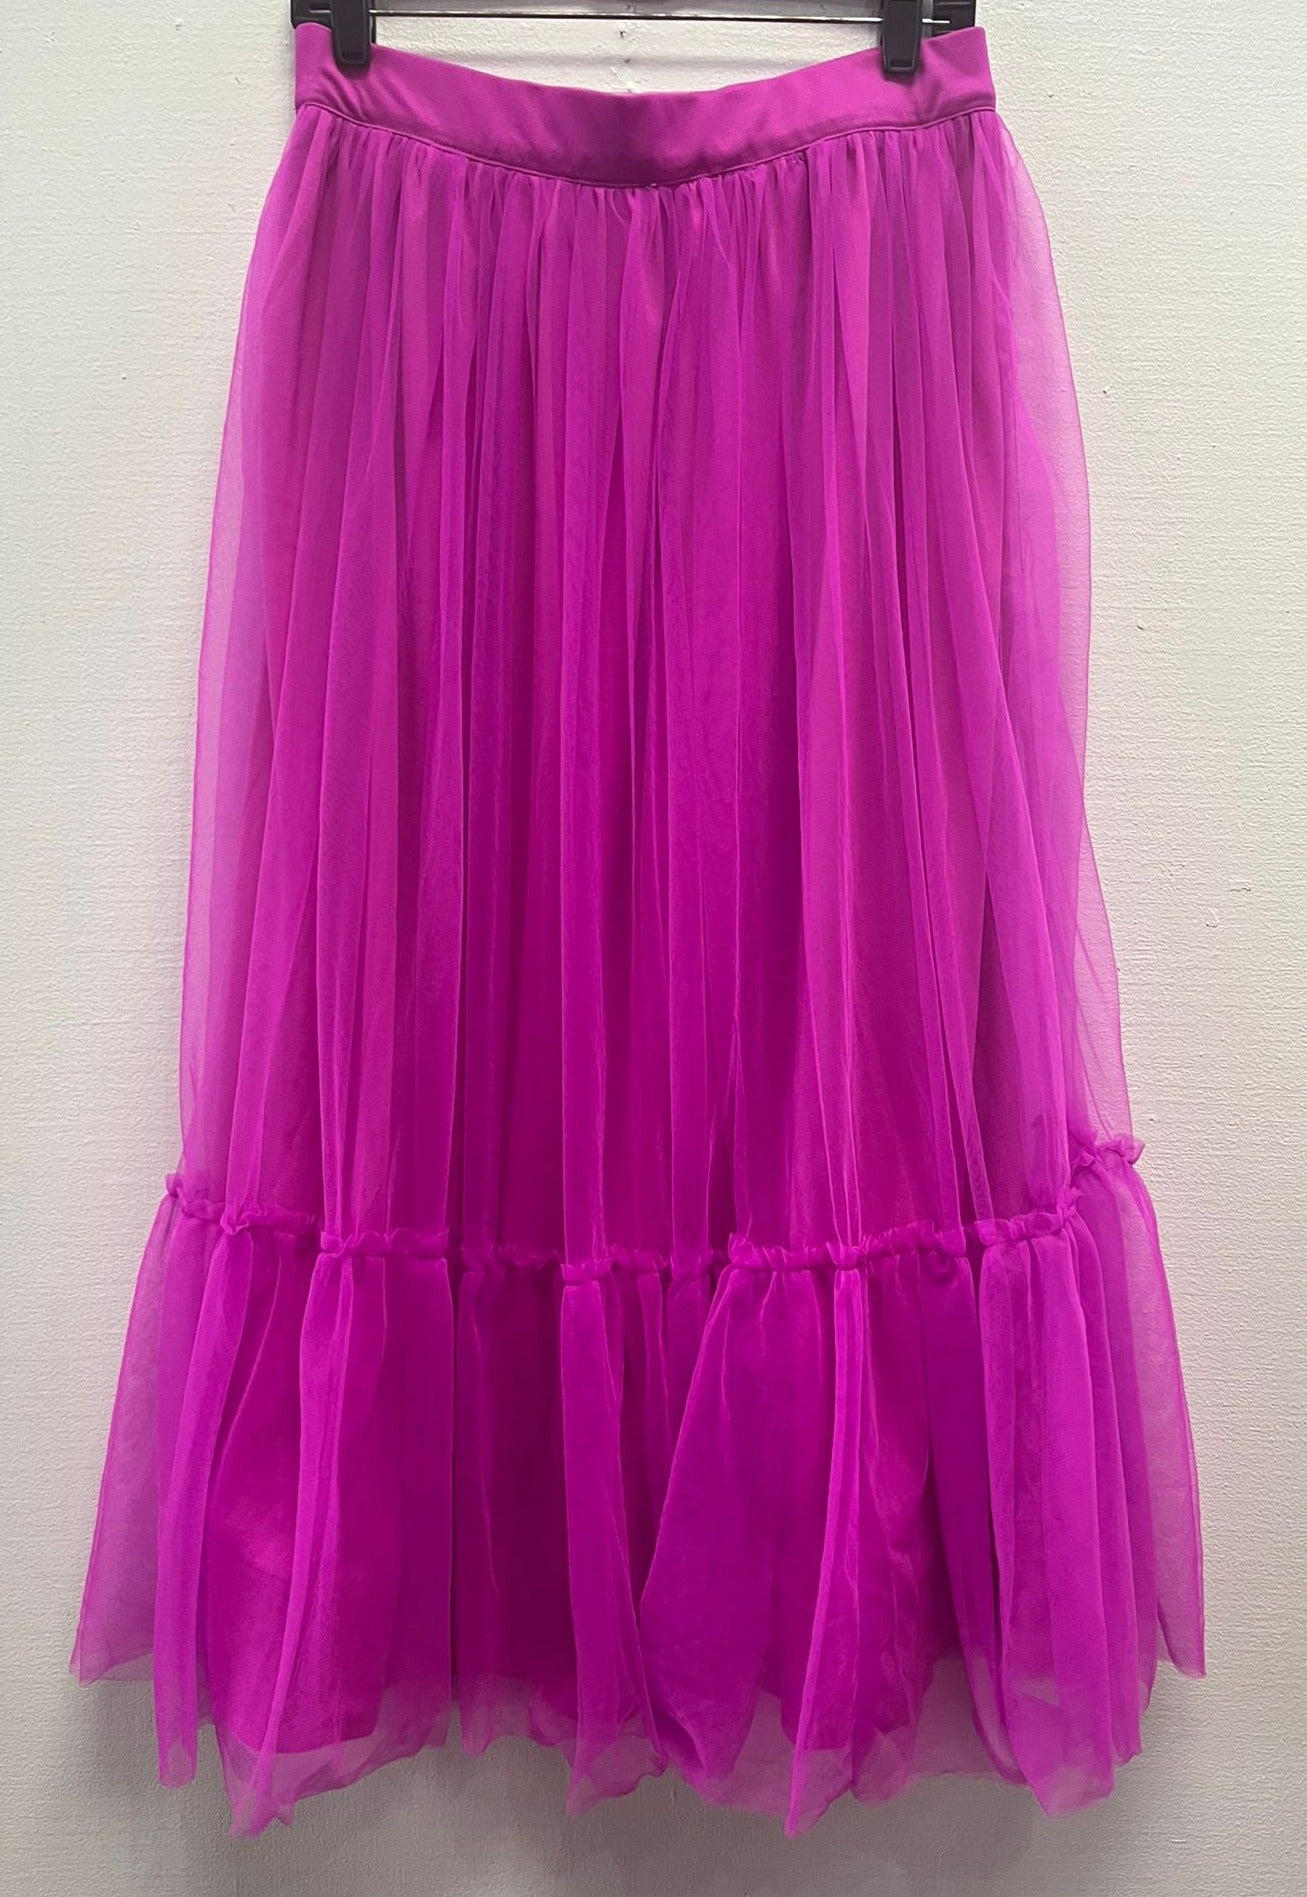 TULLE MIDI SKIRT WITH FLOWY SILHOUETTE